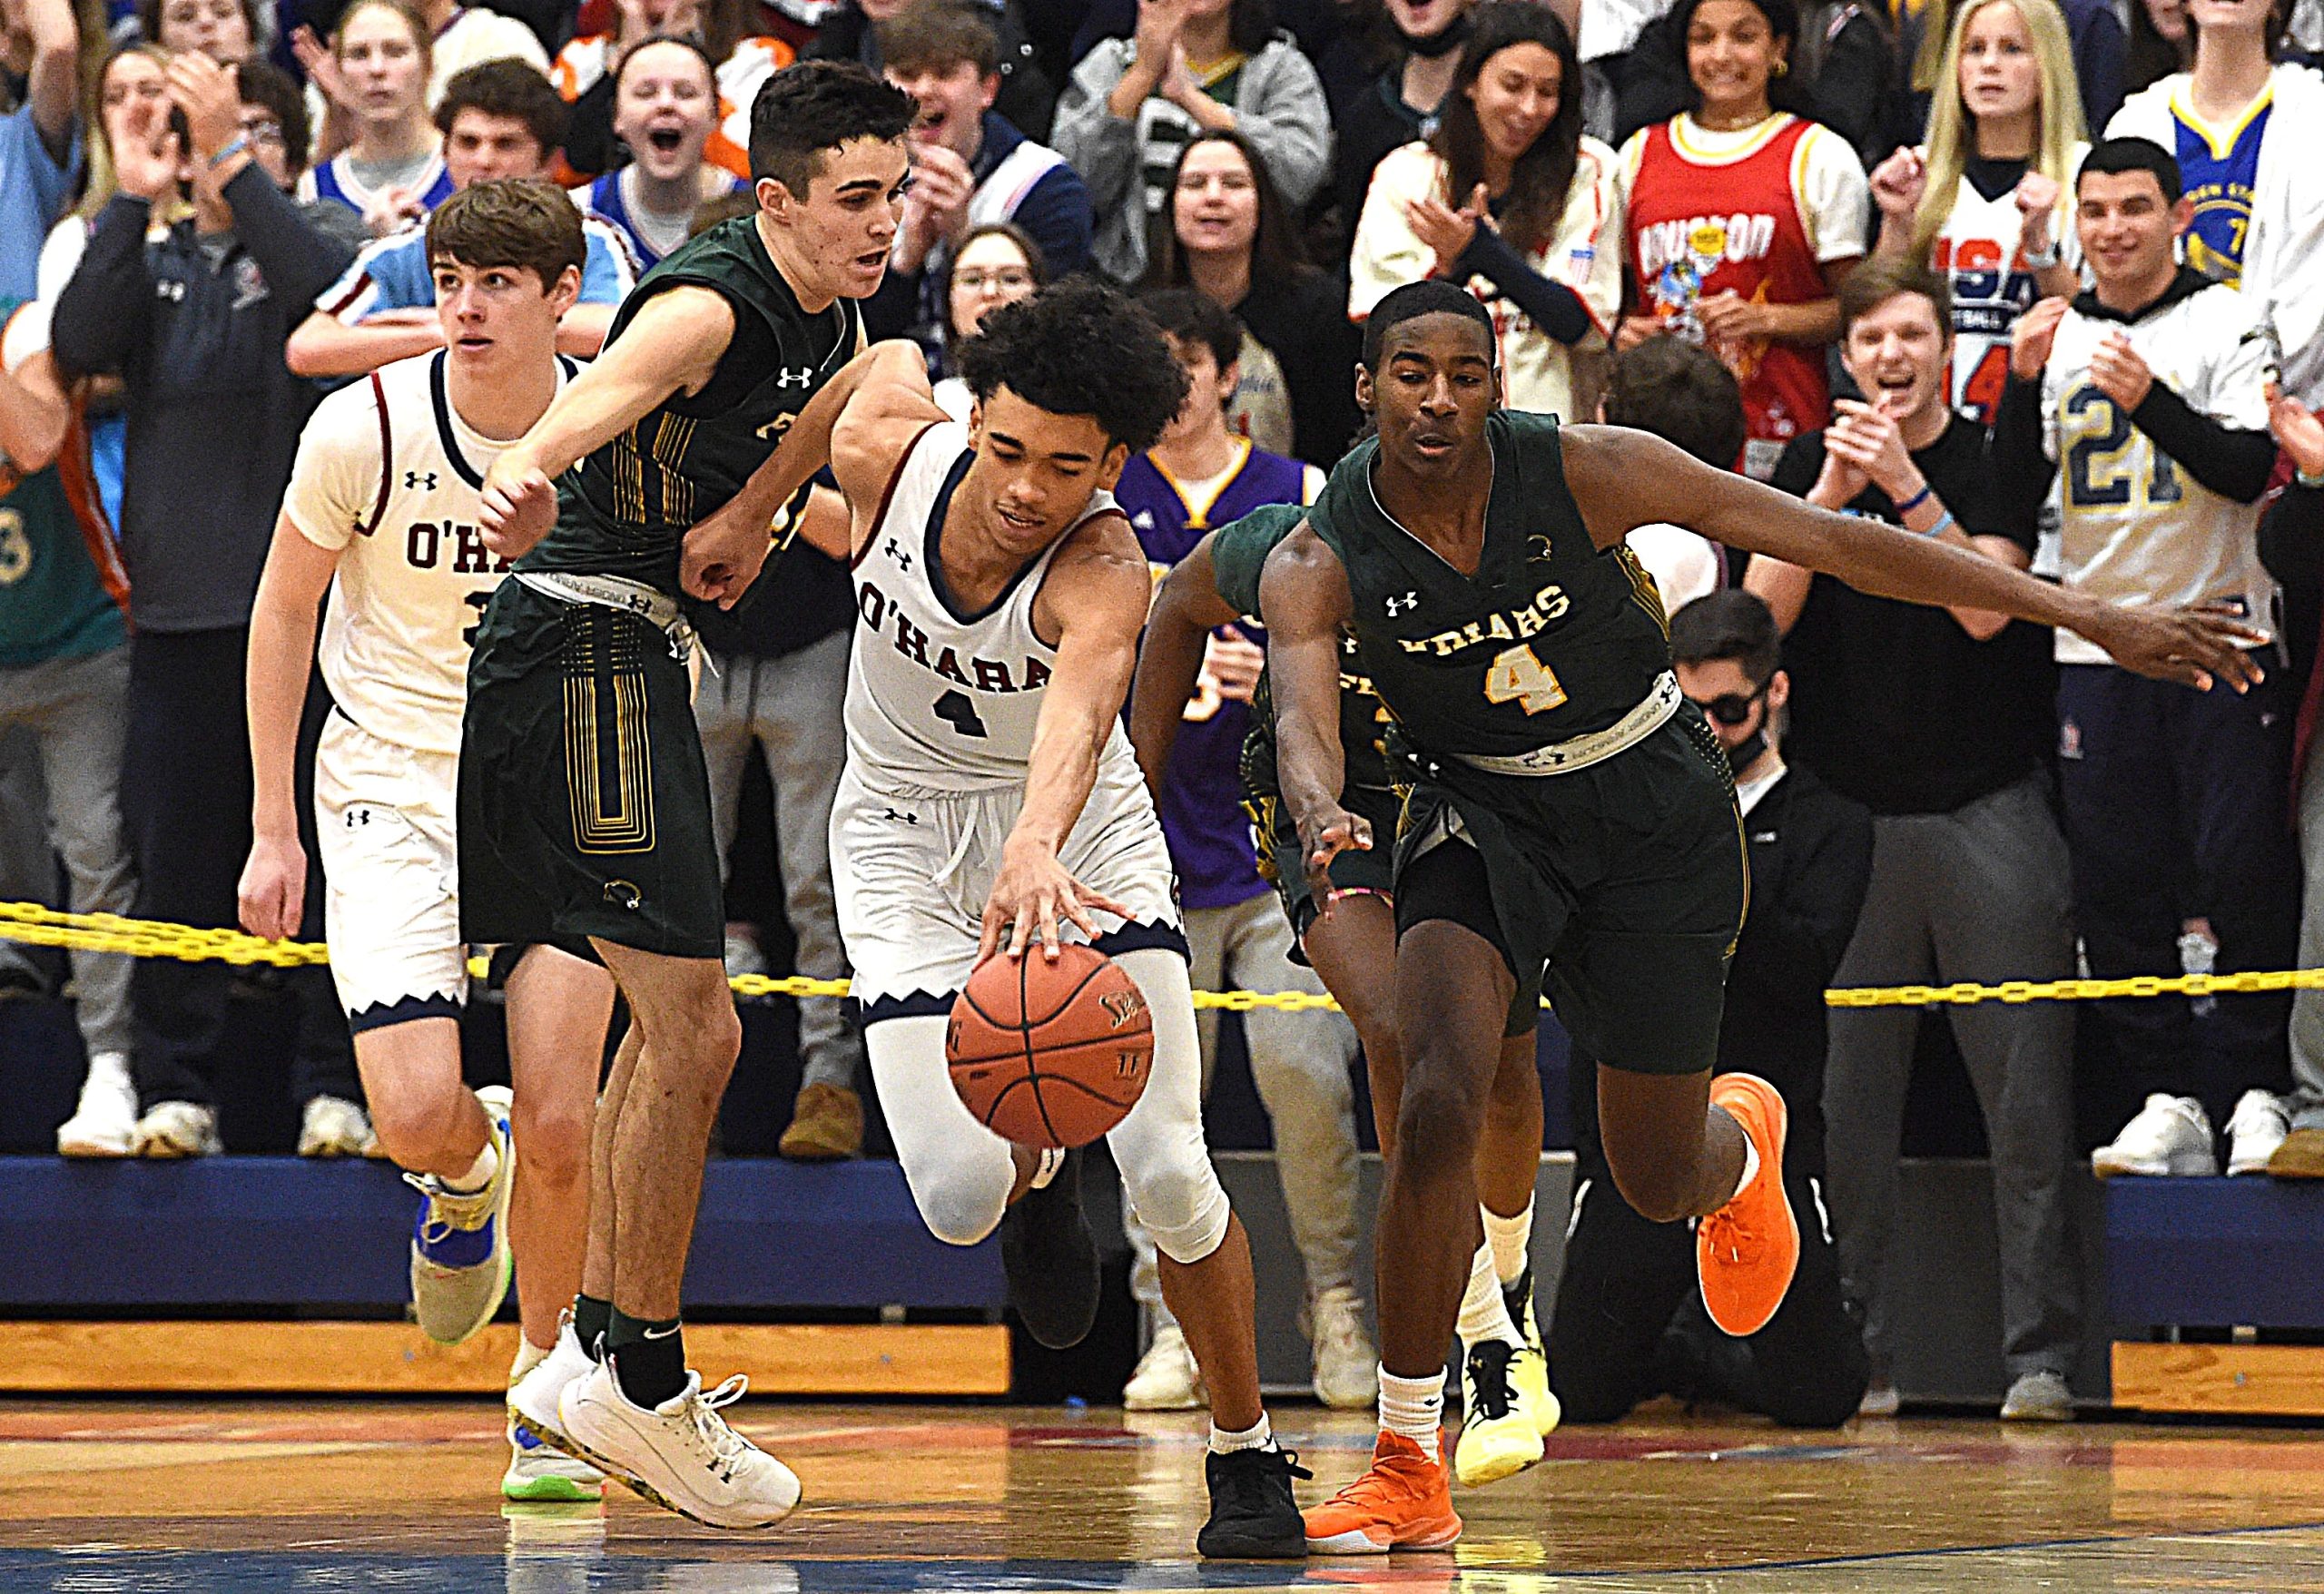 Boys Basketball Showing some Flash, OHara dashes past Haverford School 